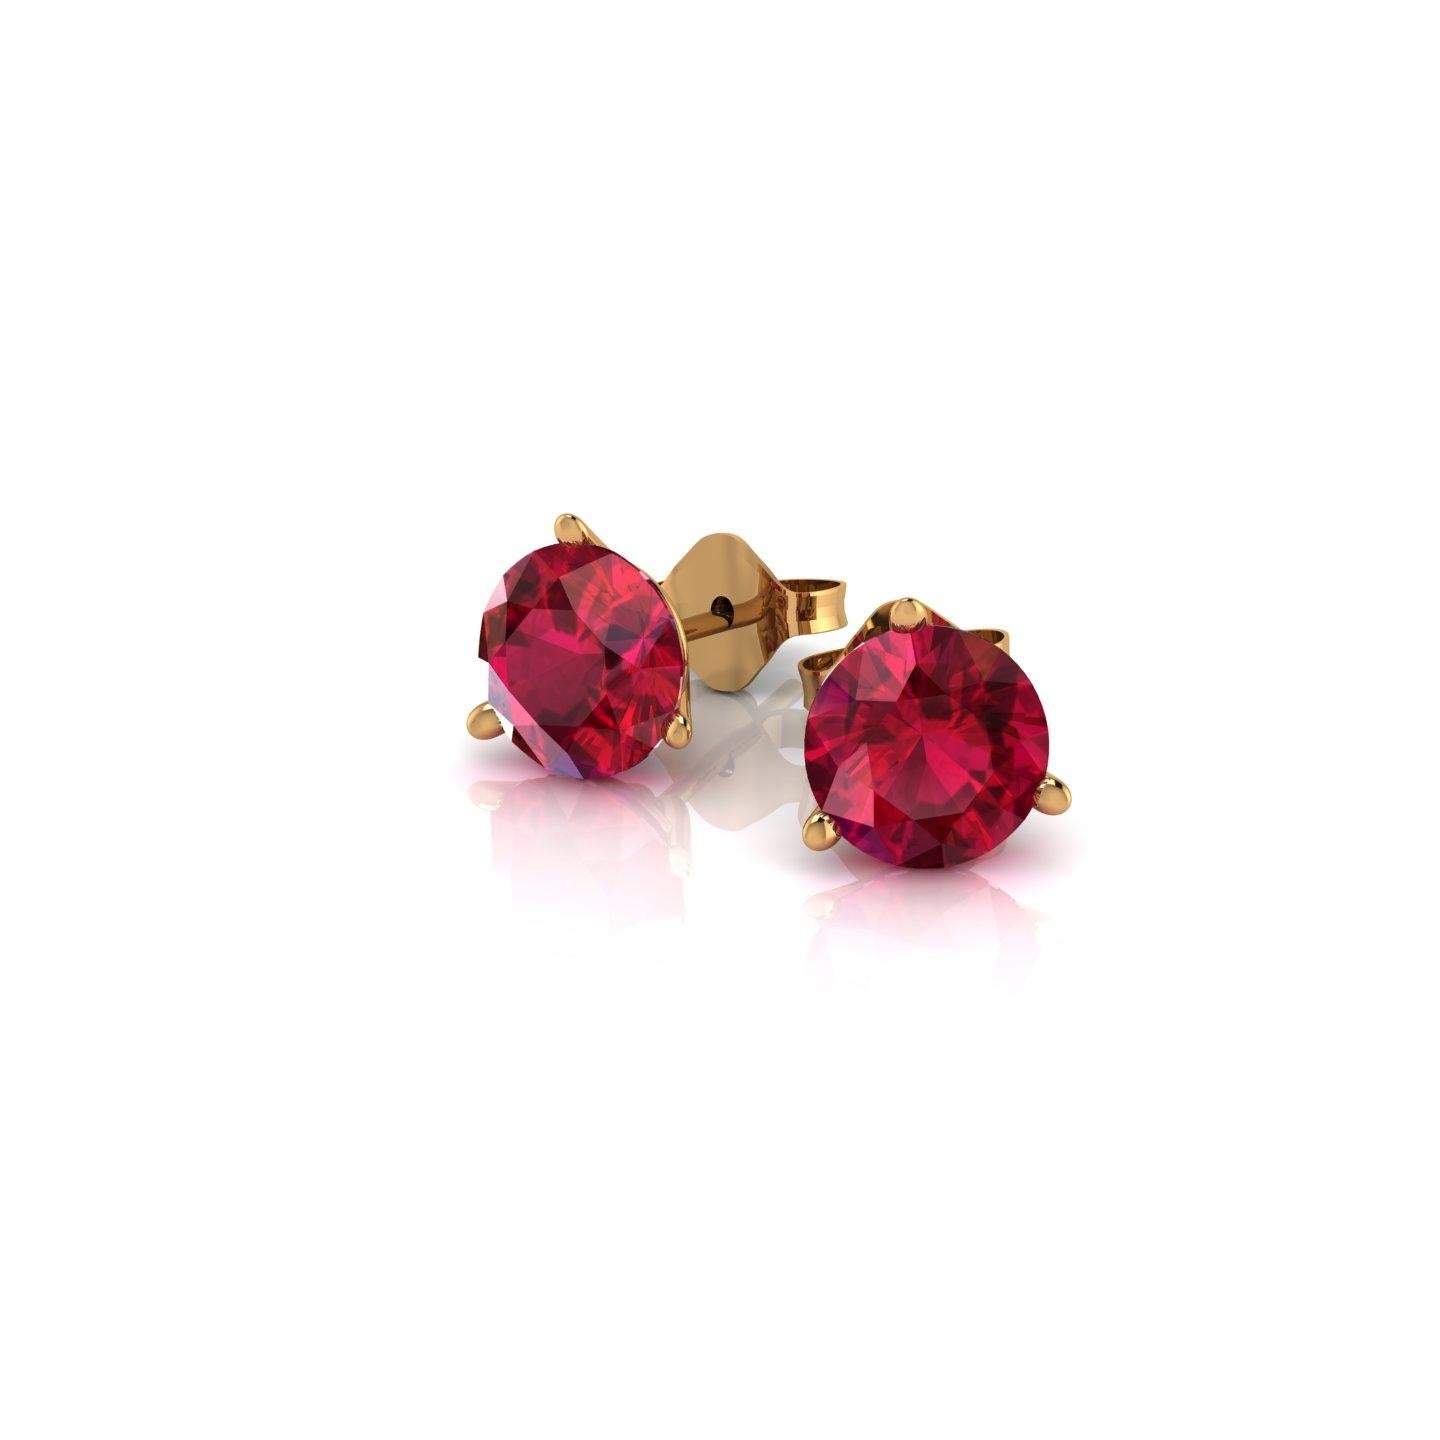 GRS Certified 2.48 carat pair of intense red Rubies, Burma, red Pigeon Blood  set in 18k yellow gold Martini stud earrings.
Push back and post, complimentary customization to screw back posts upon order.
Other customization available 